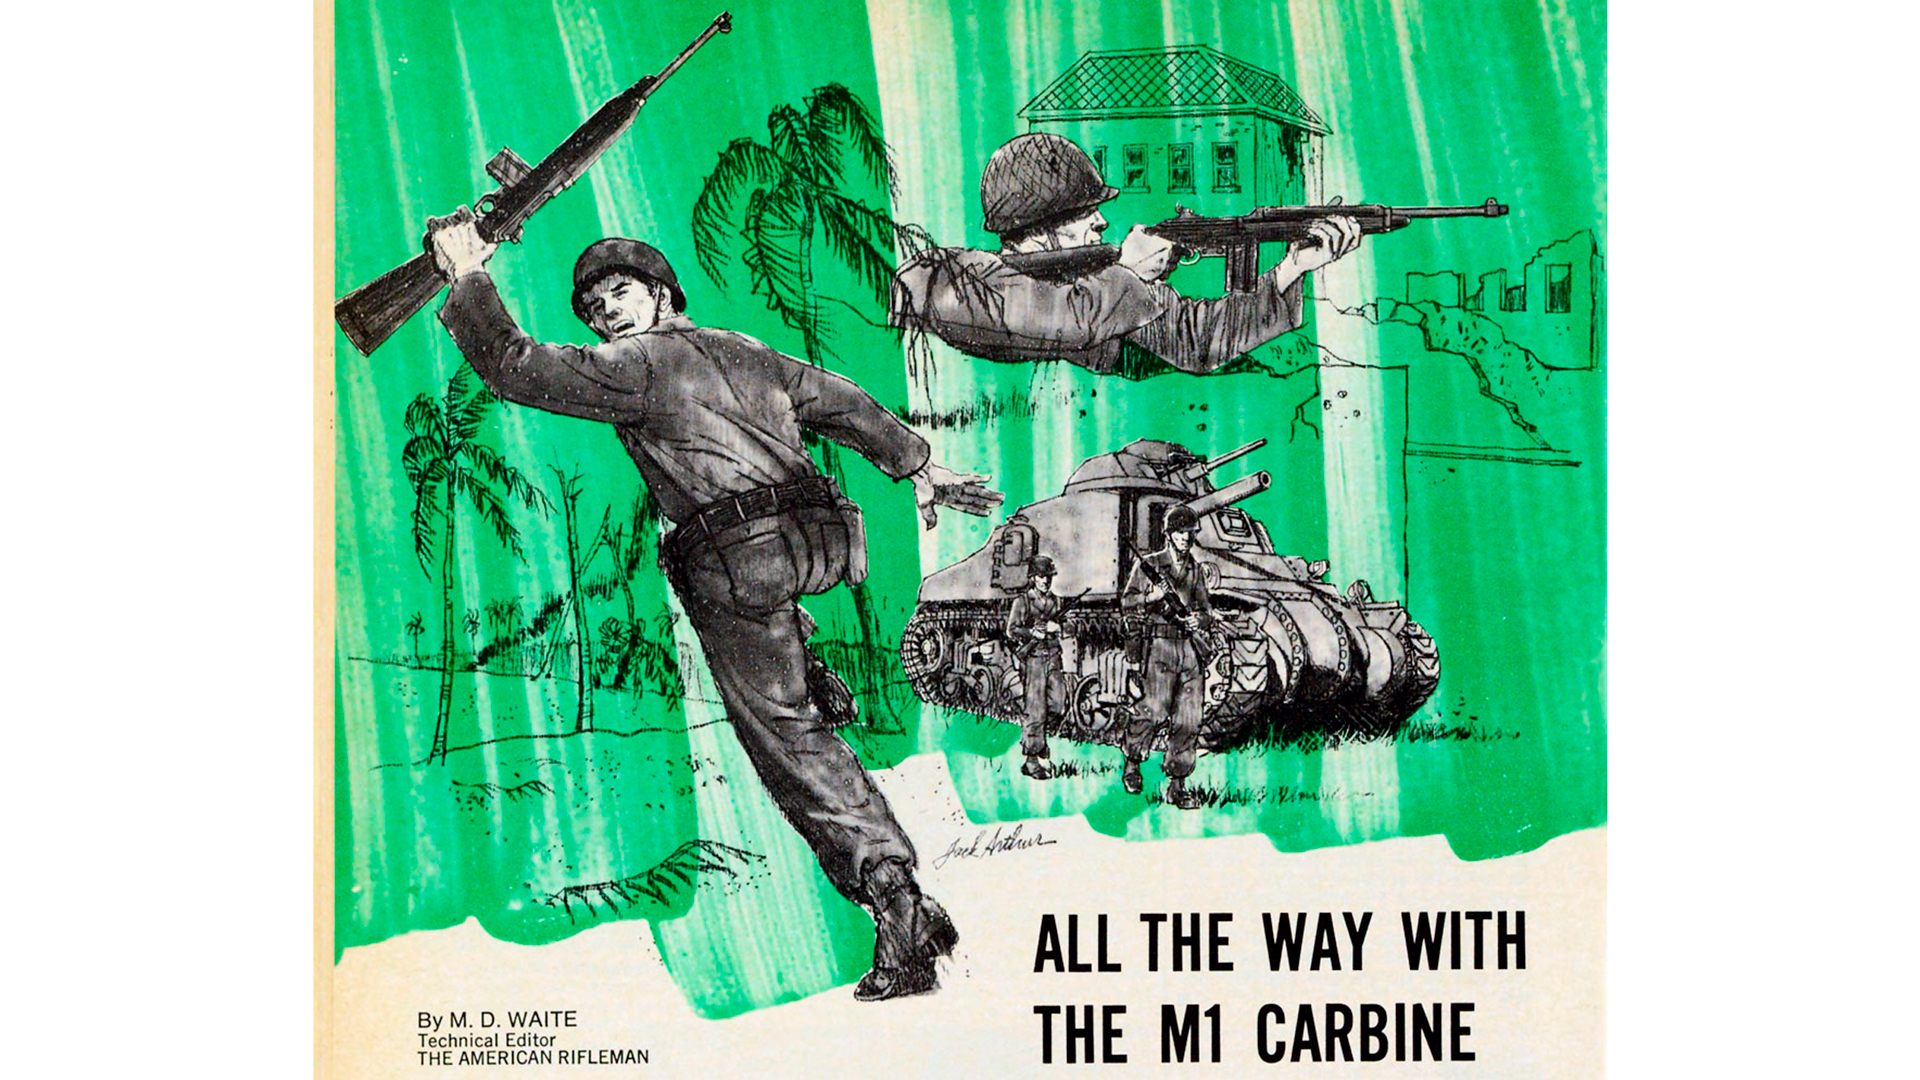 M1 Carbine artwork vintage text on image noting ALL THE WAY WITH THE M1 CARBINE